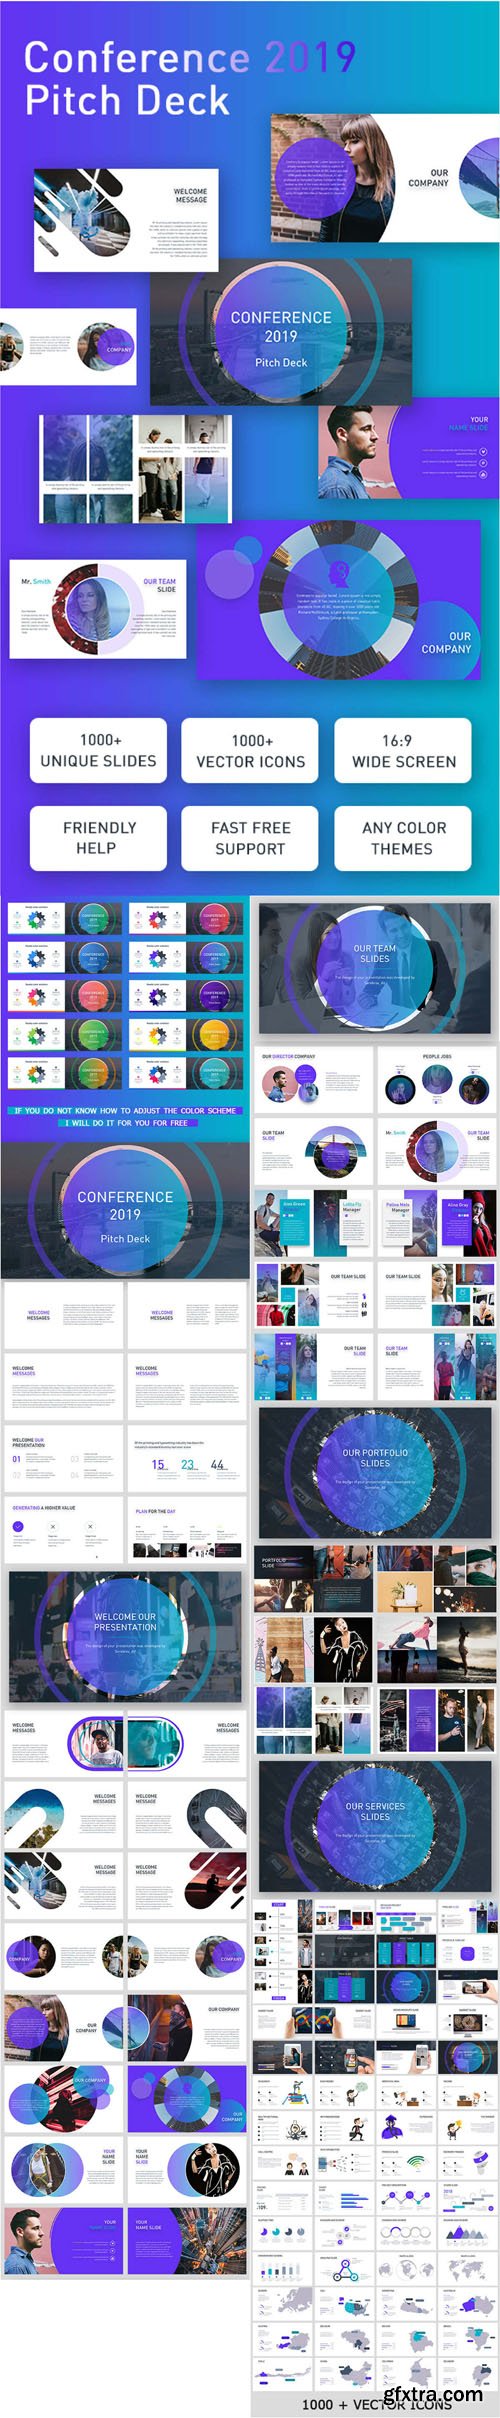 Conference Pitch Deck Powerpoint PPTX Template